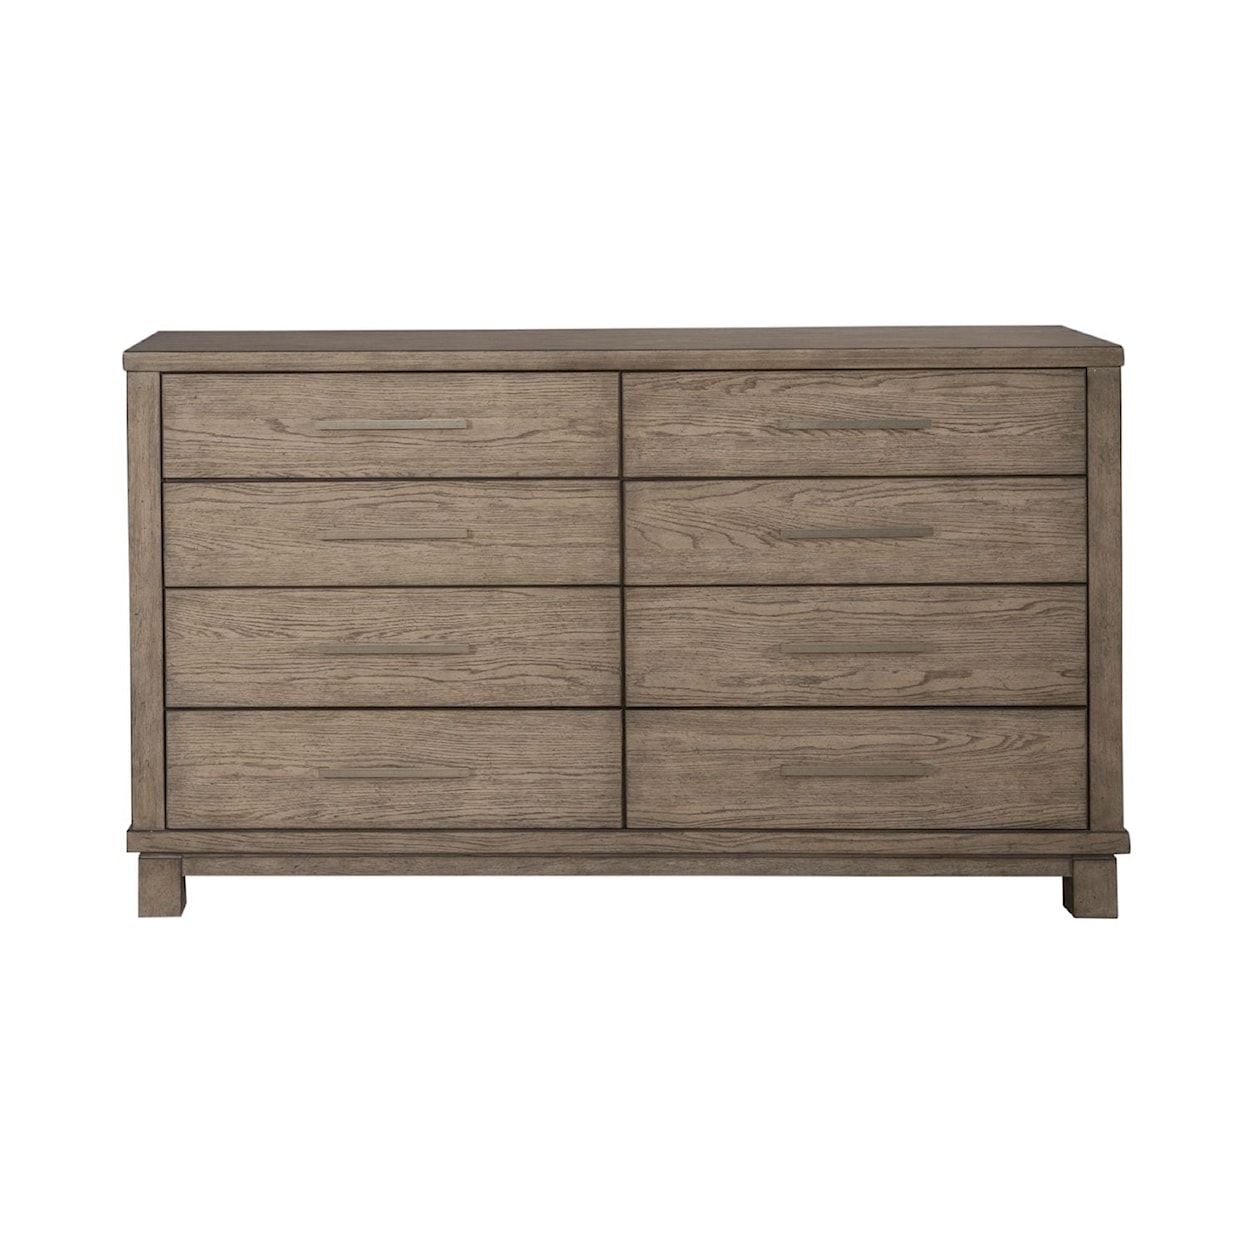 Liberty Furniture Canyon Road 5-Piece King Bedroom Group